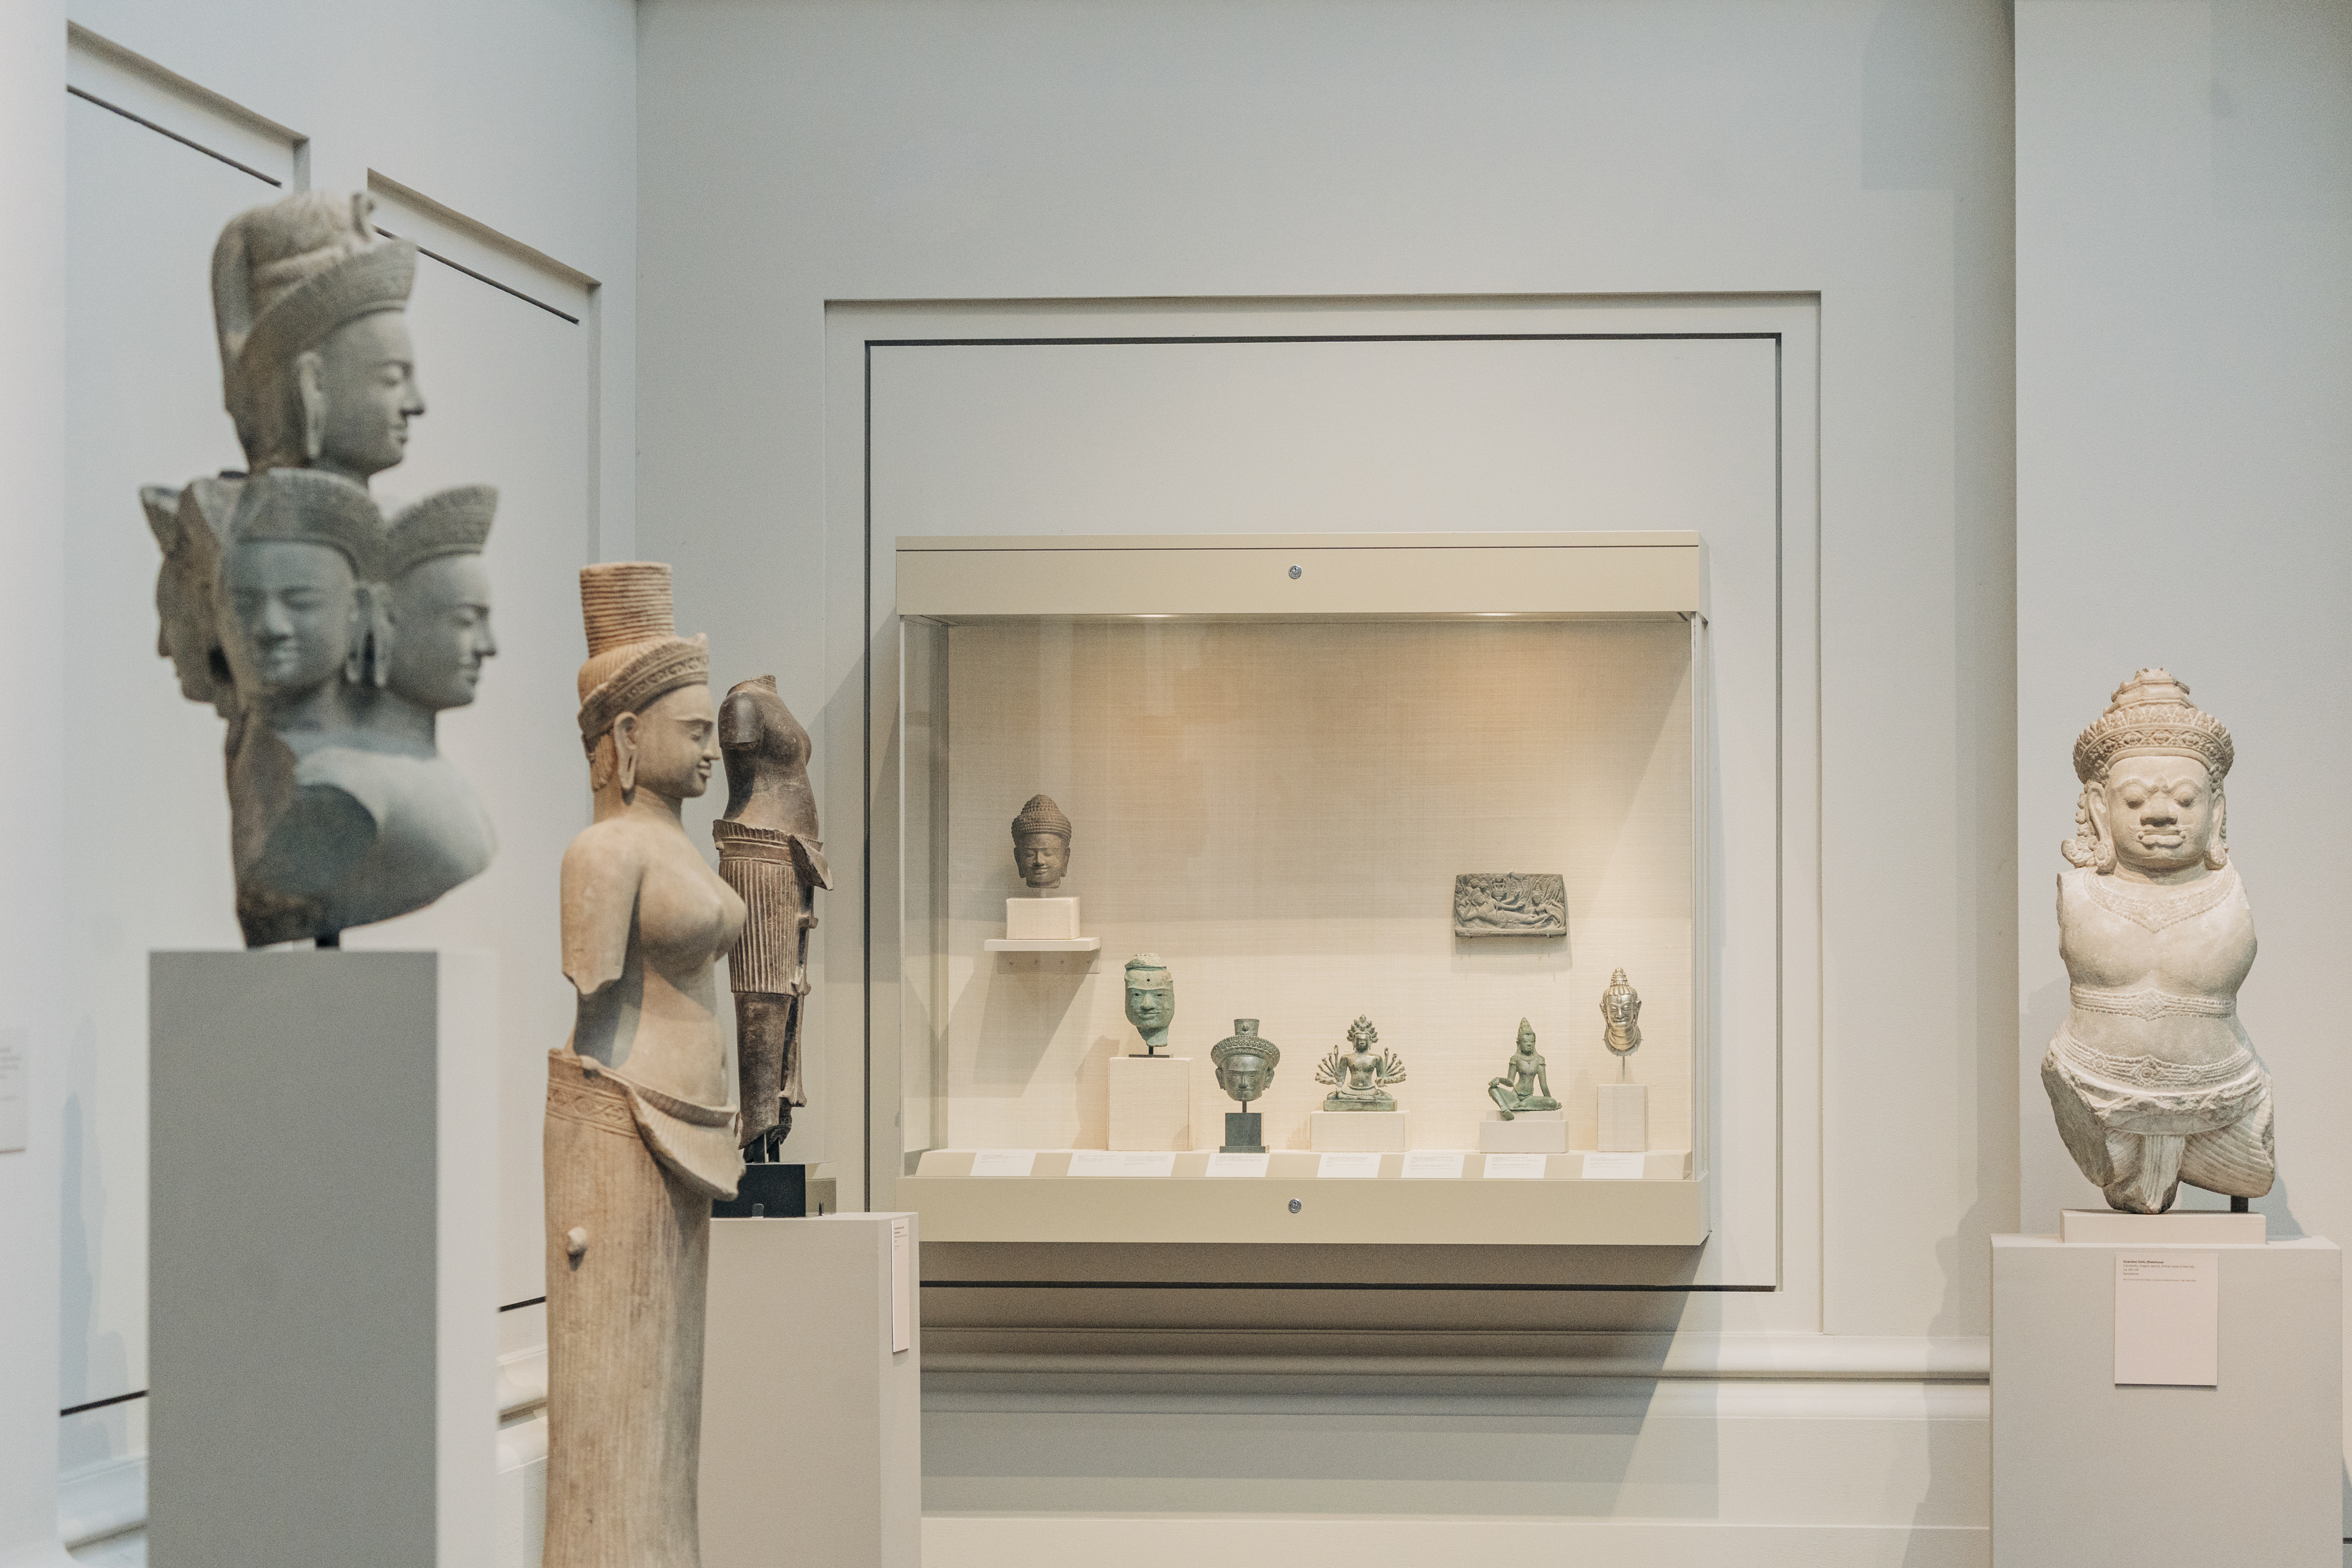 Antiquities on display in Gallery 249 at The Metropolitan Museum of Art, Manhattan, on July 29, 2022. Cambodia says it suspects that a half dozen objects on display in this corner of Gallery 249 were looted, including two artifacts that were given to the Met by British-Thai businessman and collector Douglas Latchford. (Jeenah Moon/The New York Times)